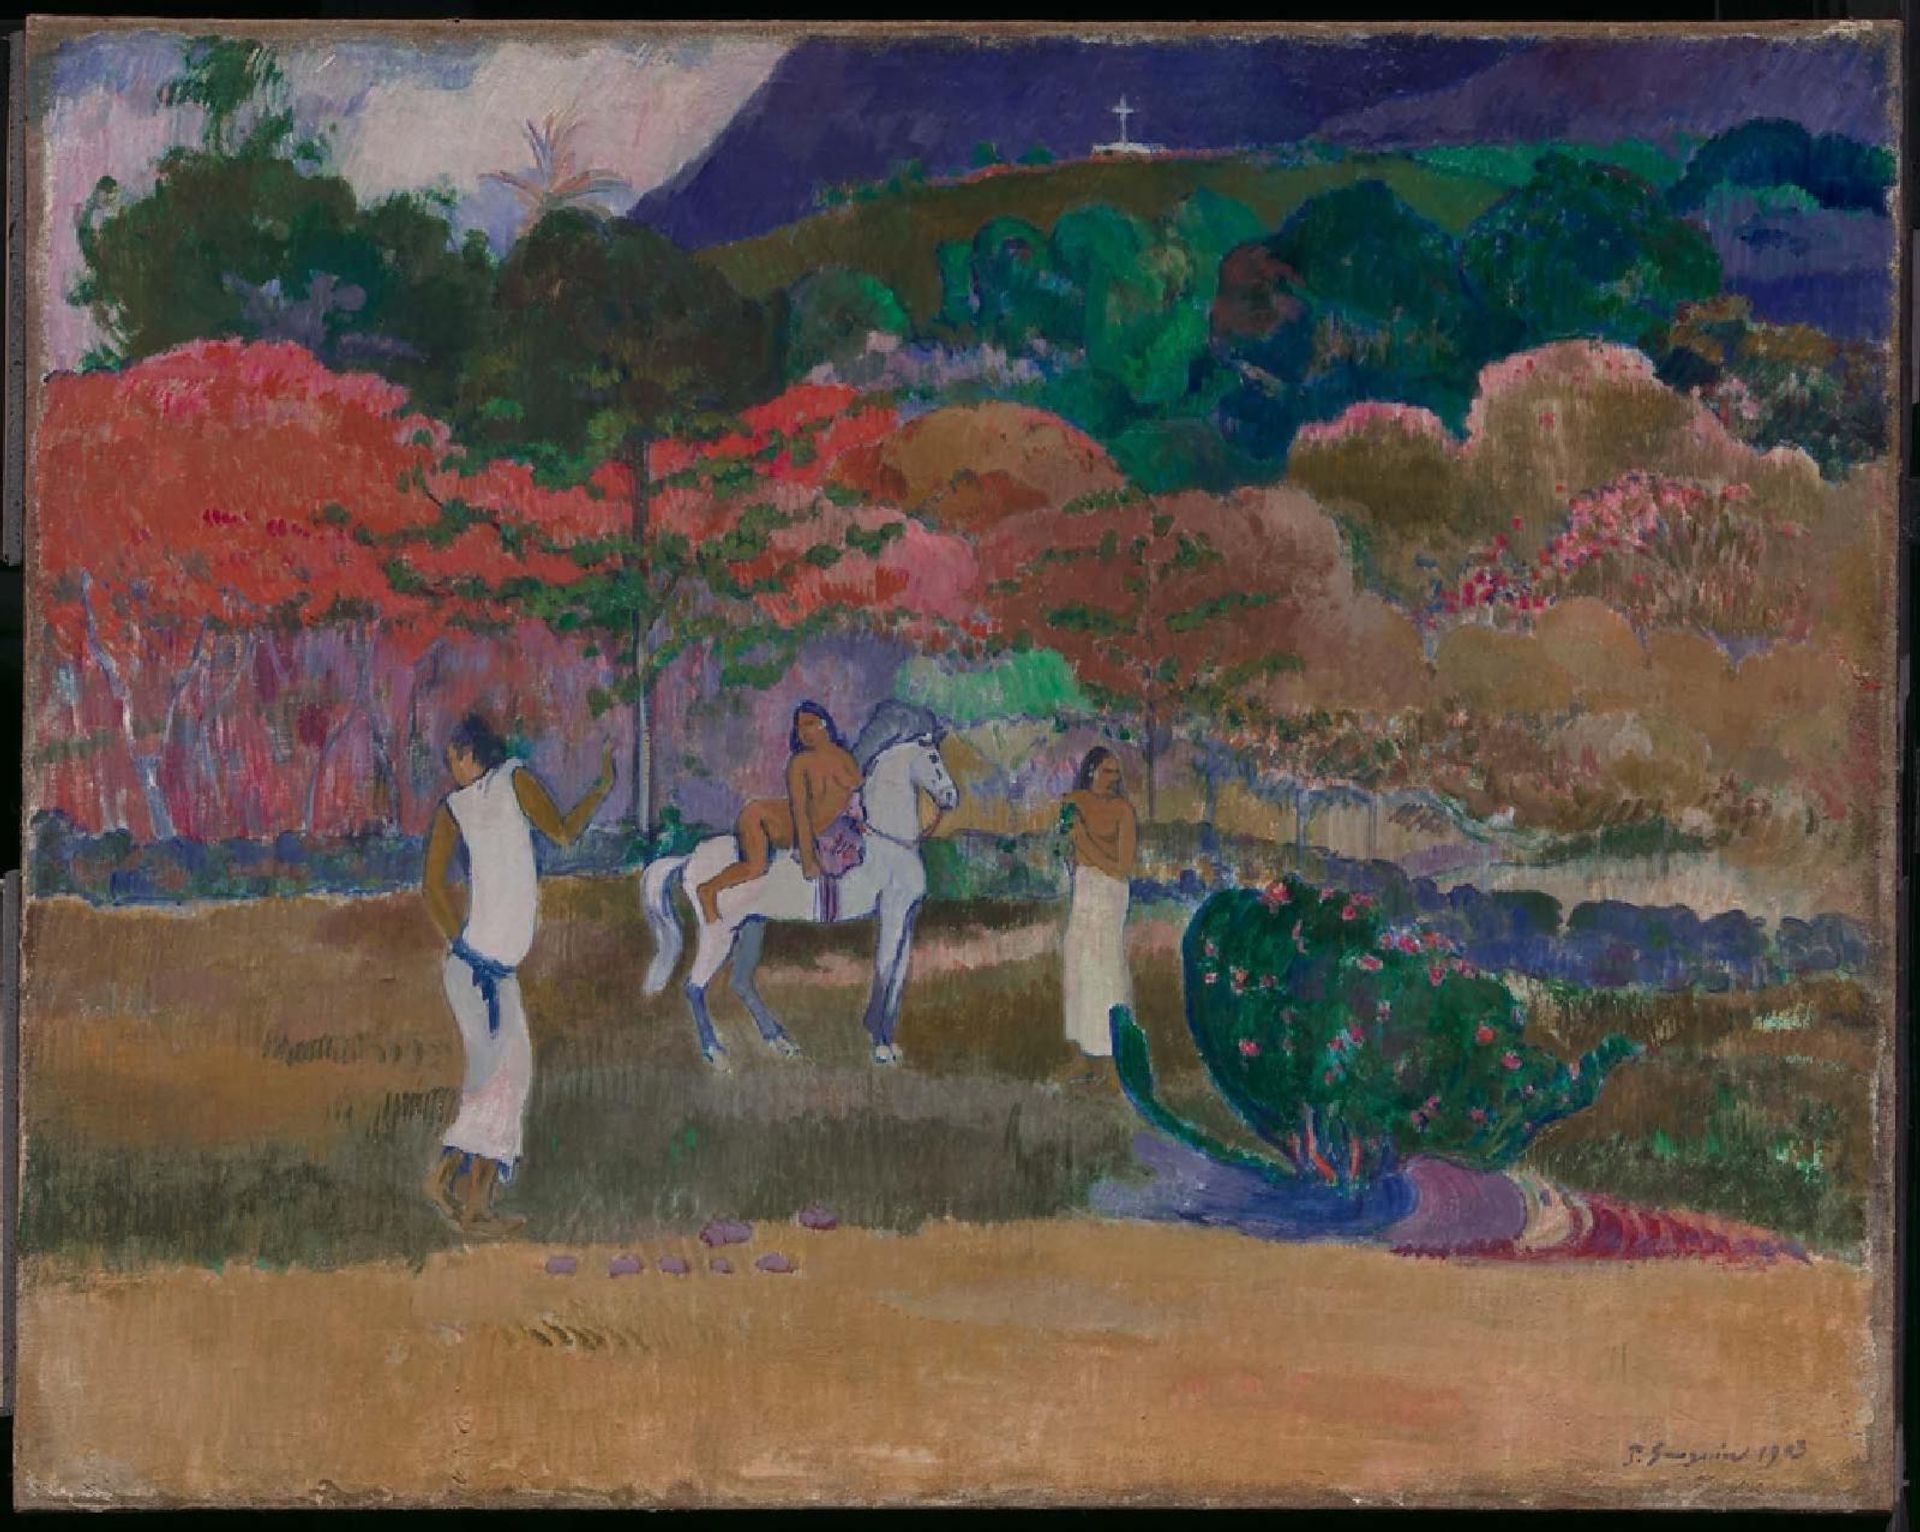 Paul Gauguin's Women and a White Horse (1903), part of the Museum of Fine Arts, Boston's collection 